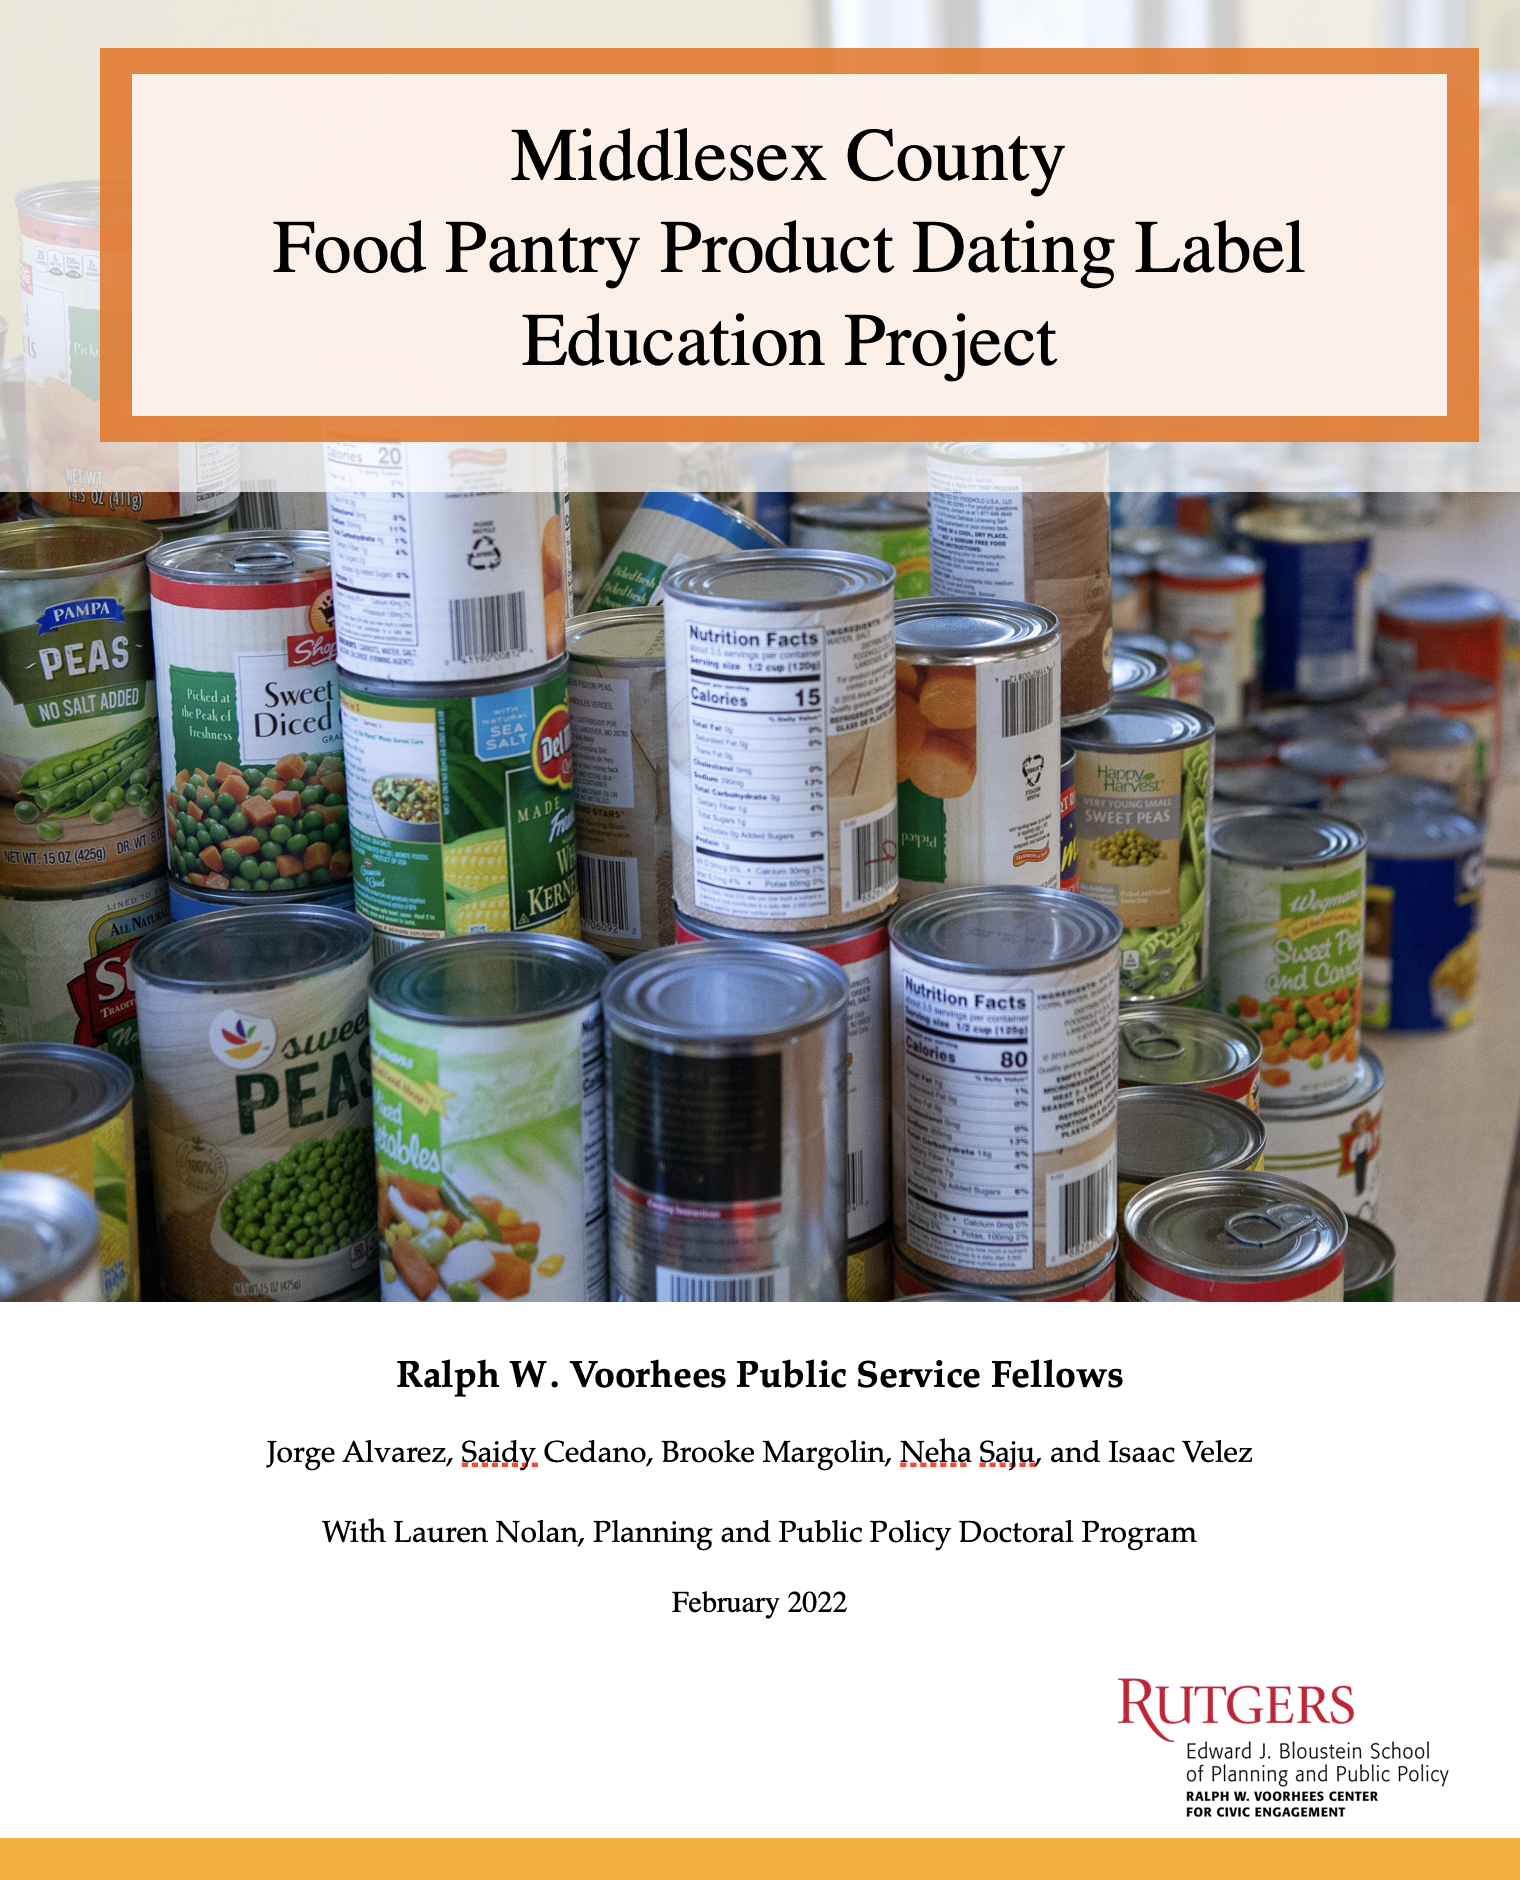 Food Pantry Product Labeling Education Project